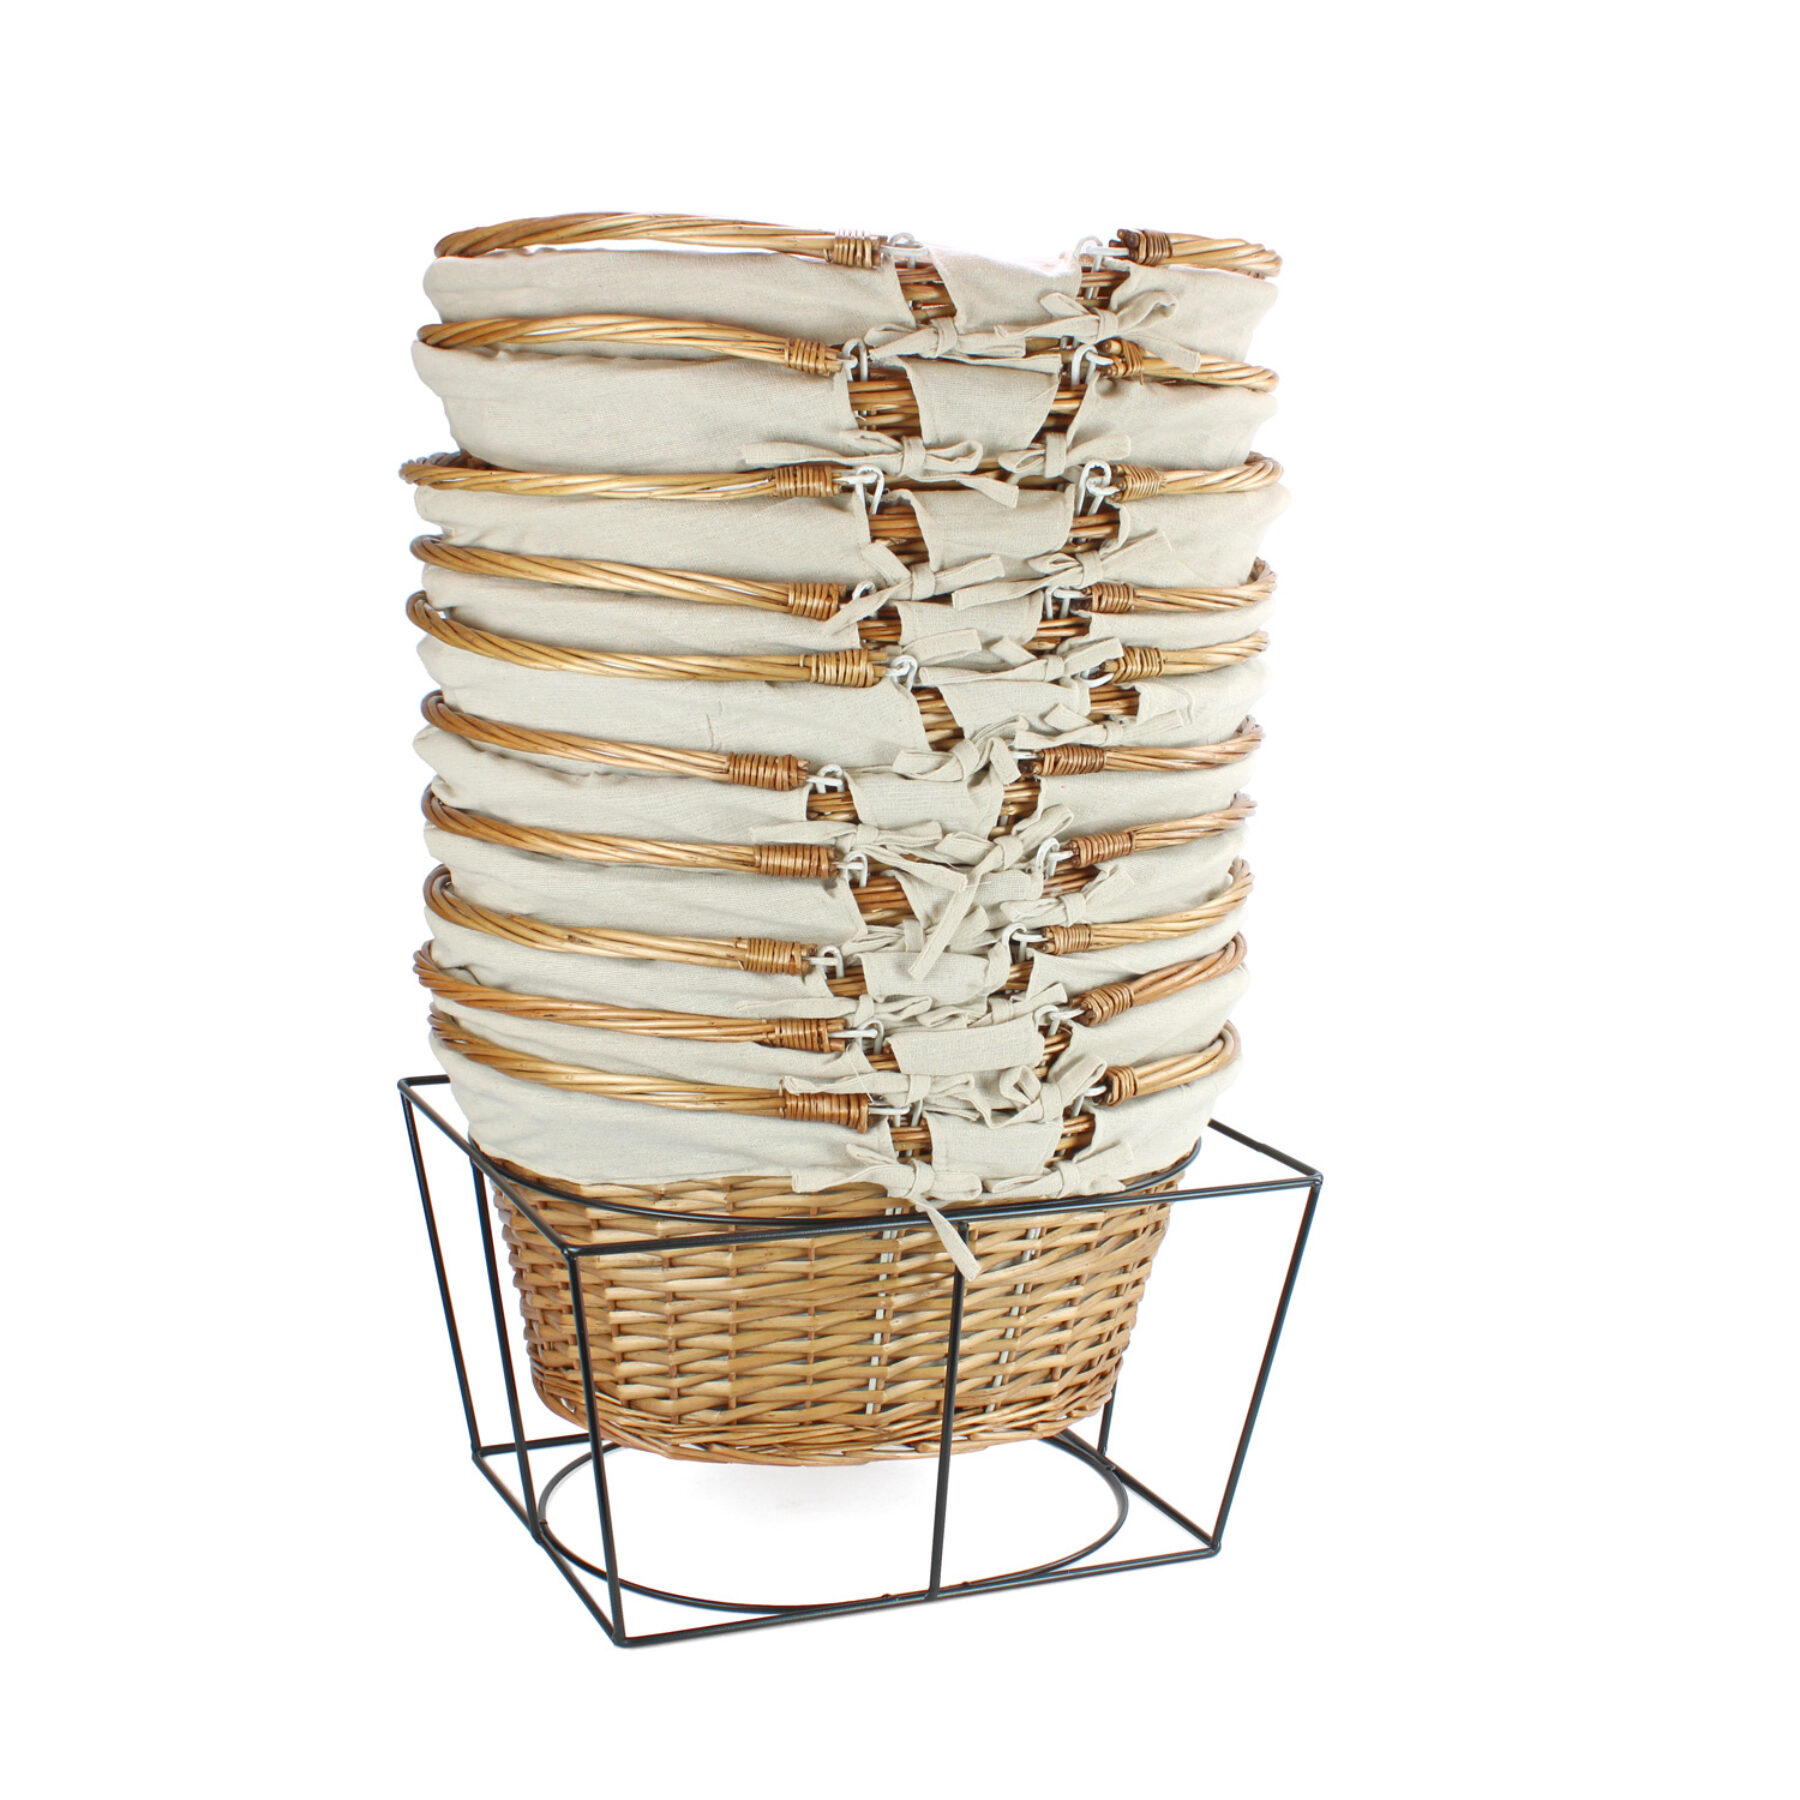 10 Large Shopping Baskets & Metal Stand - Buff